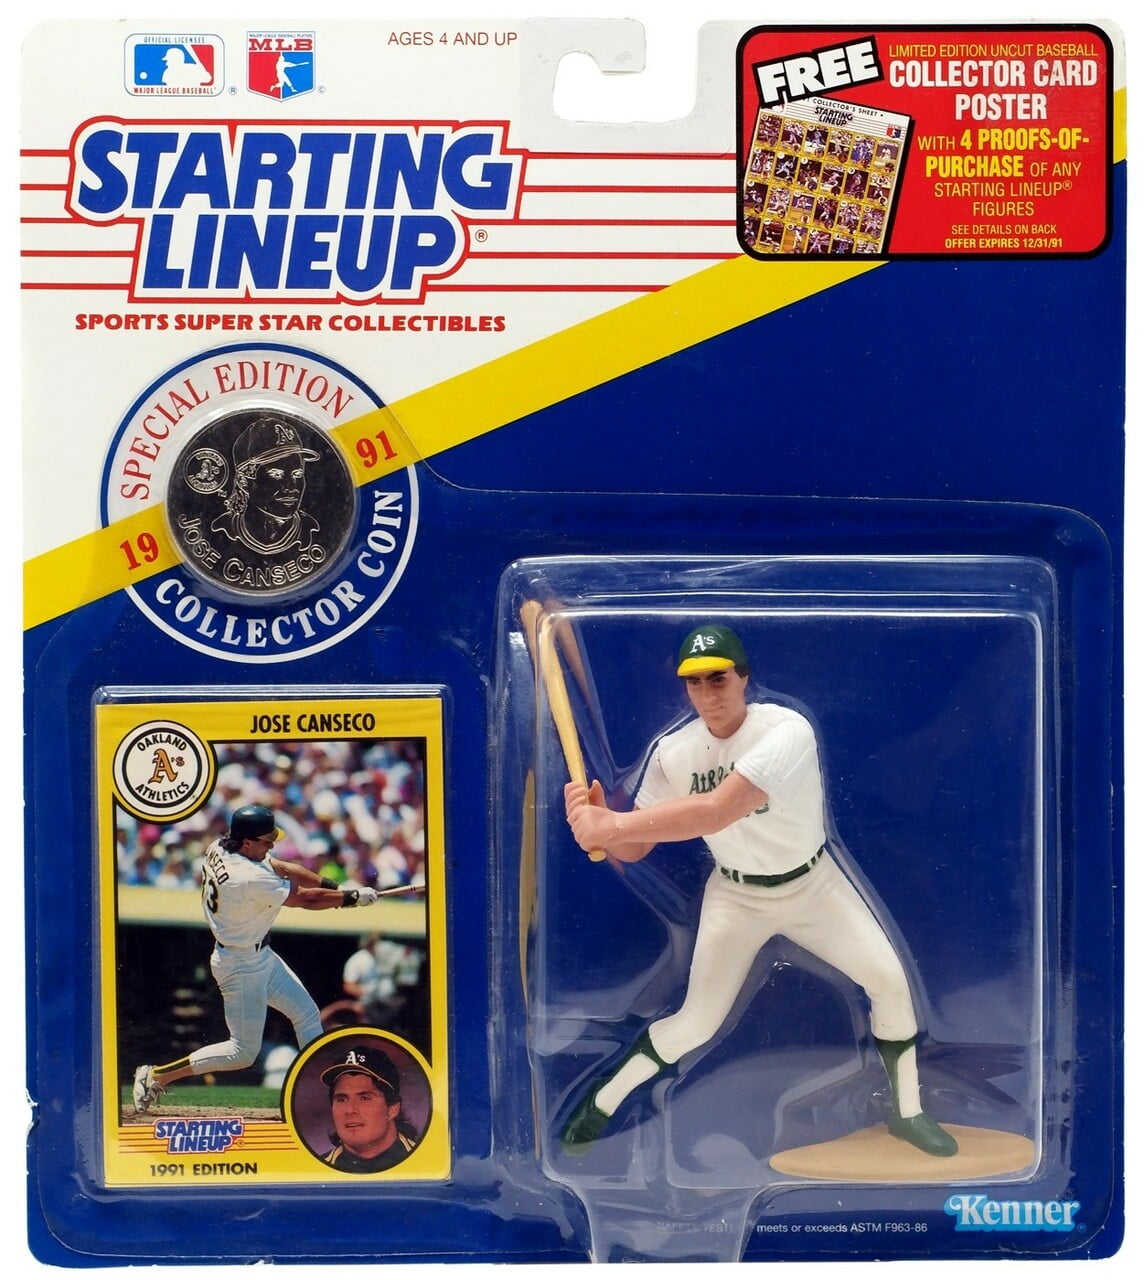 Starting Lineup Jose Canseco 1998 Athlétisme Kenner BASEBALL Action Figure Comme neuf on Card 